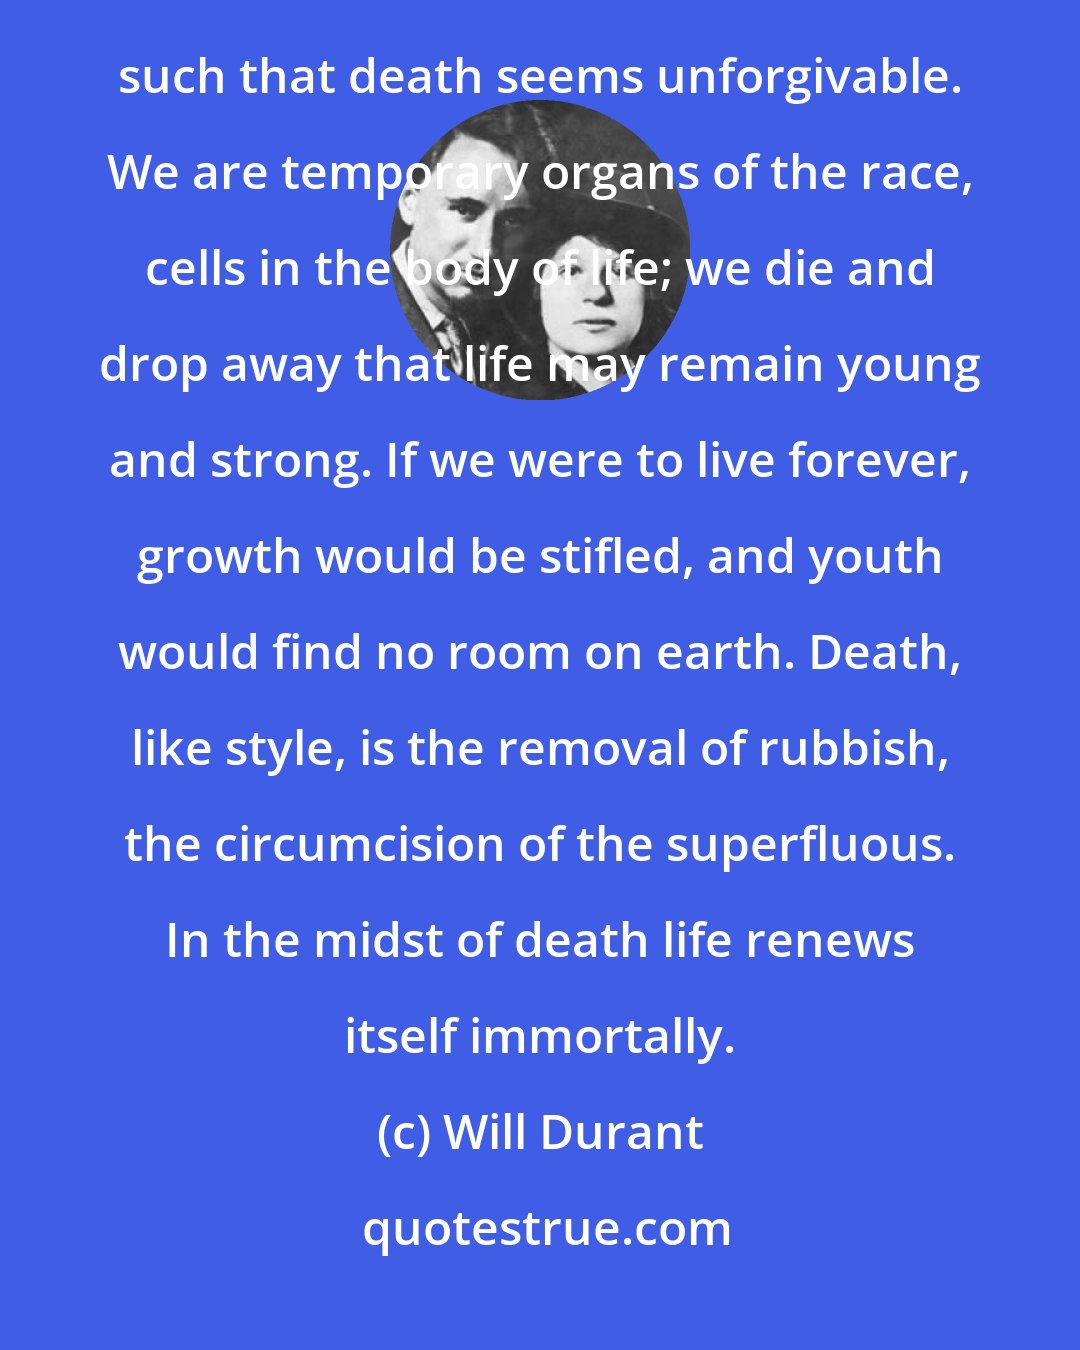 Will Durant: What if it is for life's sake that we must die? In truth we are not individuals; and it is because we think ourselves such that death seems unforgivable. We are temporary organs of the race, cells in the body of life; we die and drop away that life may remain young and strong. If we were to live forever, growth would be stifled, and youth would find no room on earth. Death, like style, is the removal of rubbish, the circumcision of the superfluous. In the midst of death life renews itself immortally.